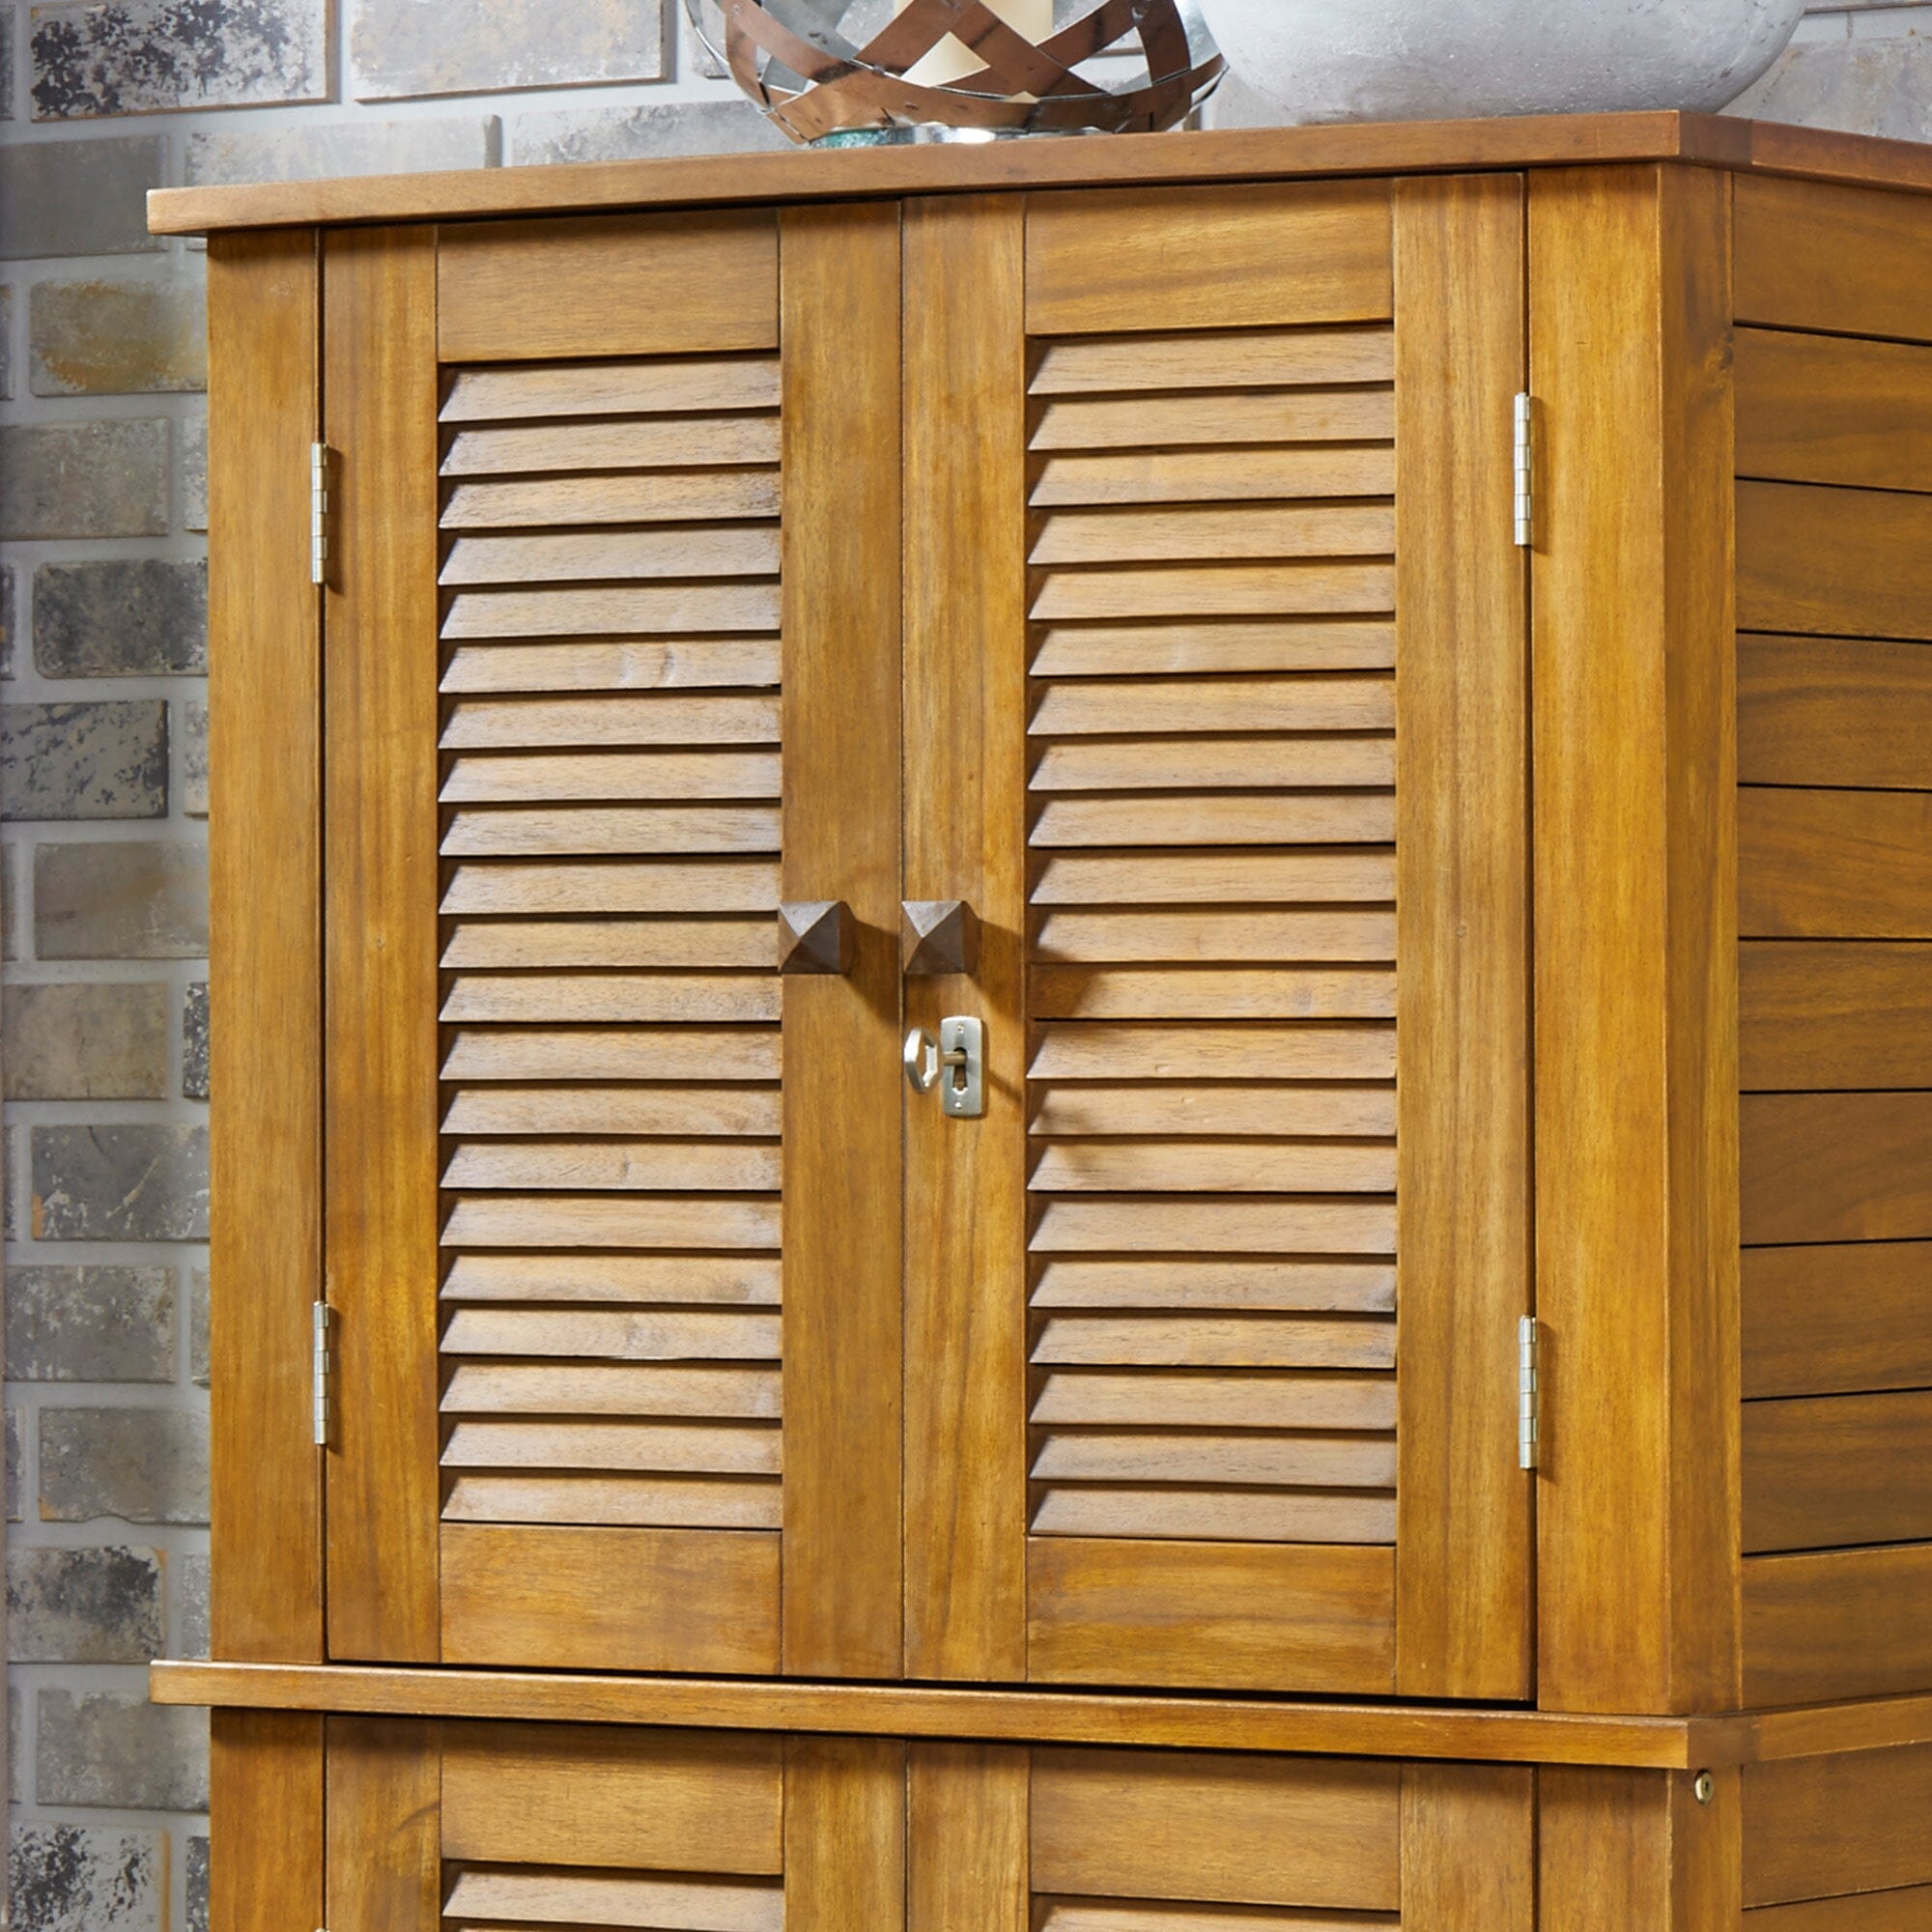 Traditional Outdoor Storage Cabinet By Maho Outdoor Storage Maho